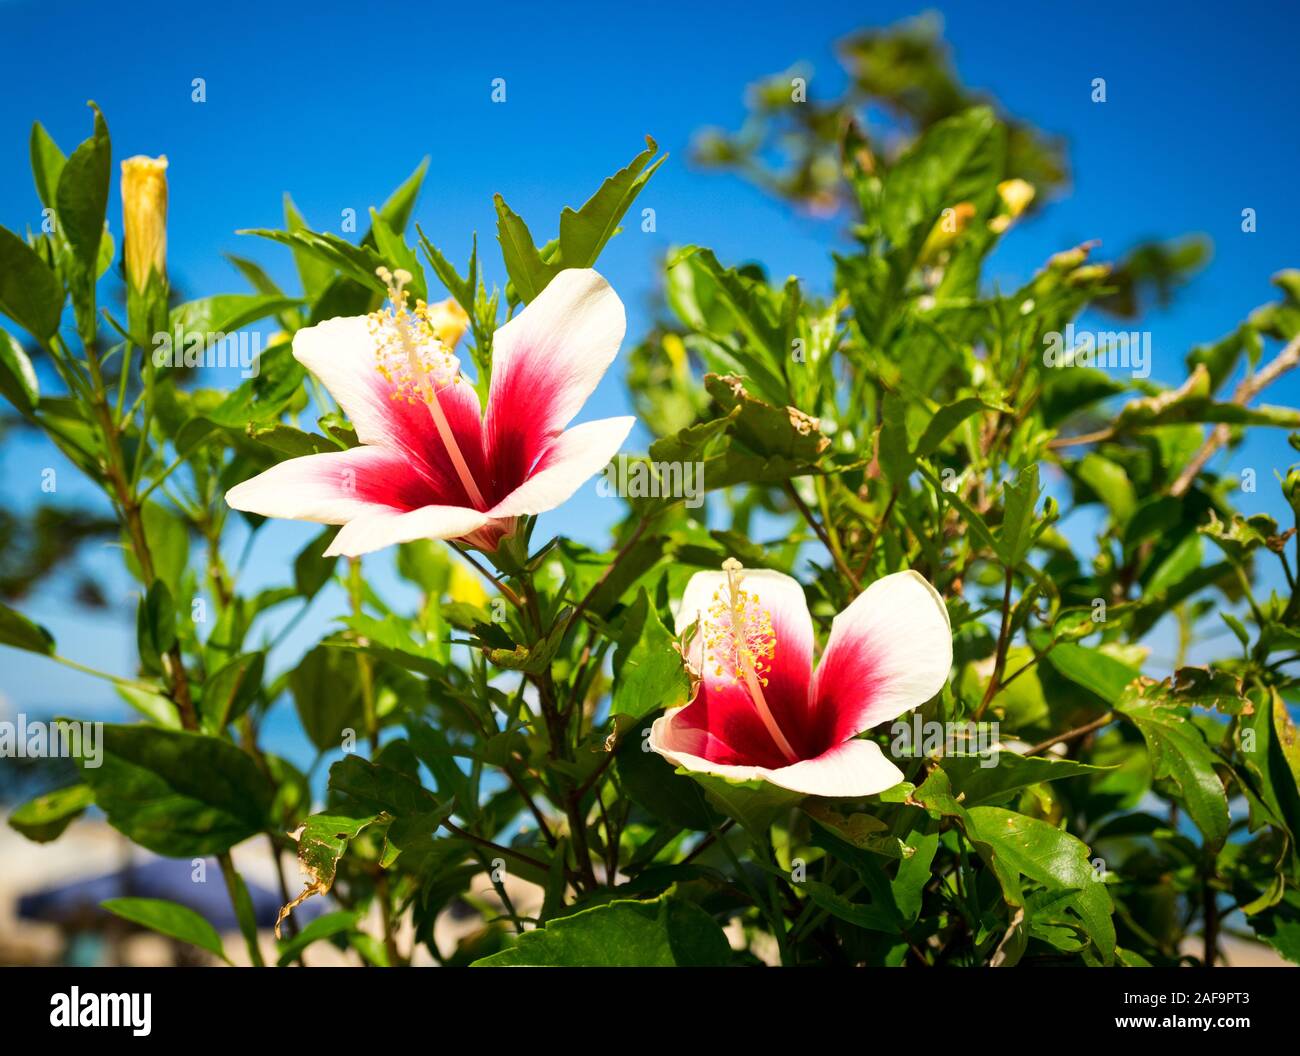 White Chinese hibiscus (Hibiscus rosa-sinensis) flowers with red hearts, also known as a Hawaiian hibiscus or rose mallow. Ishigaki, Okinawa, Japan Stock Photo